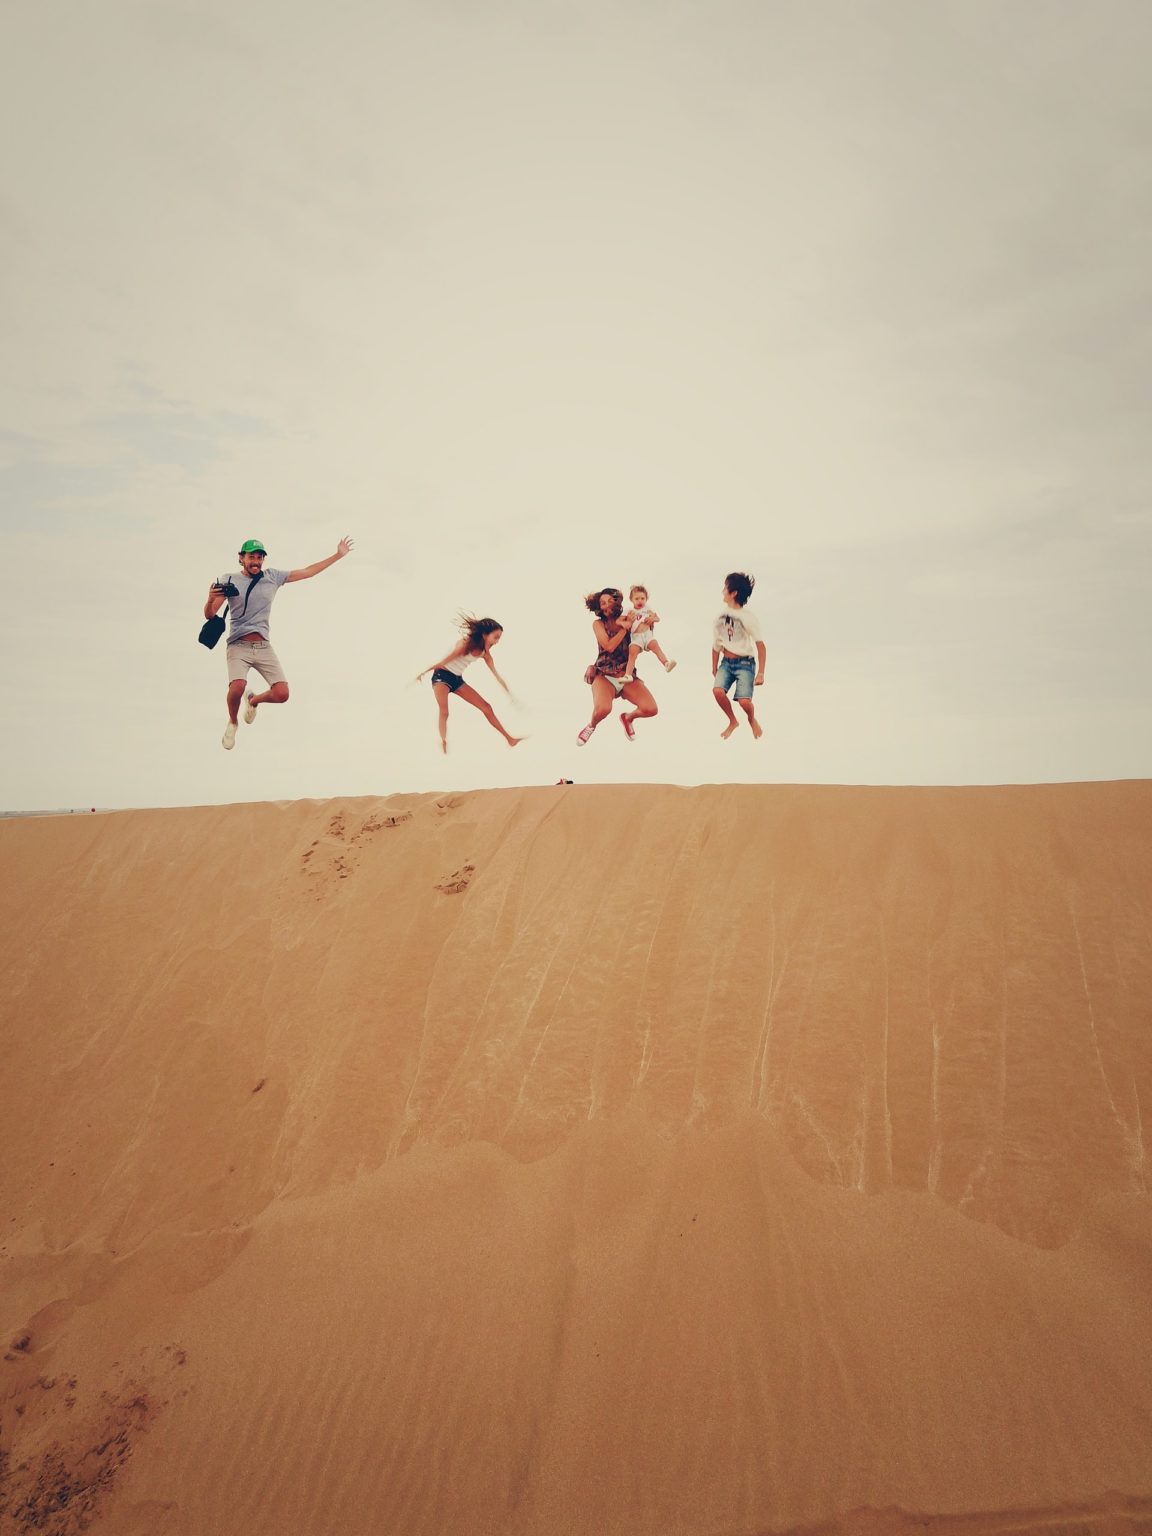 a group of people jumping on a sand dune